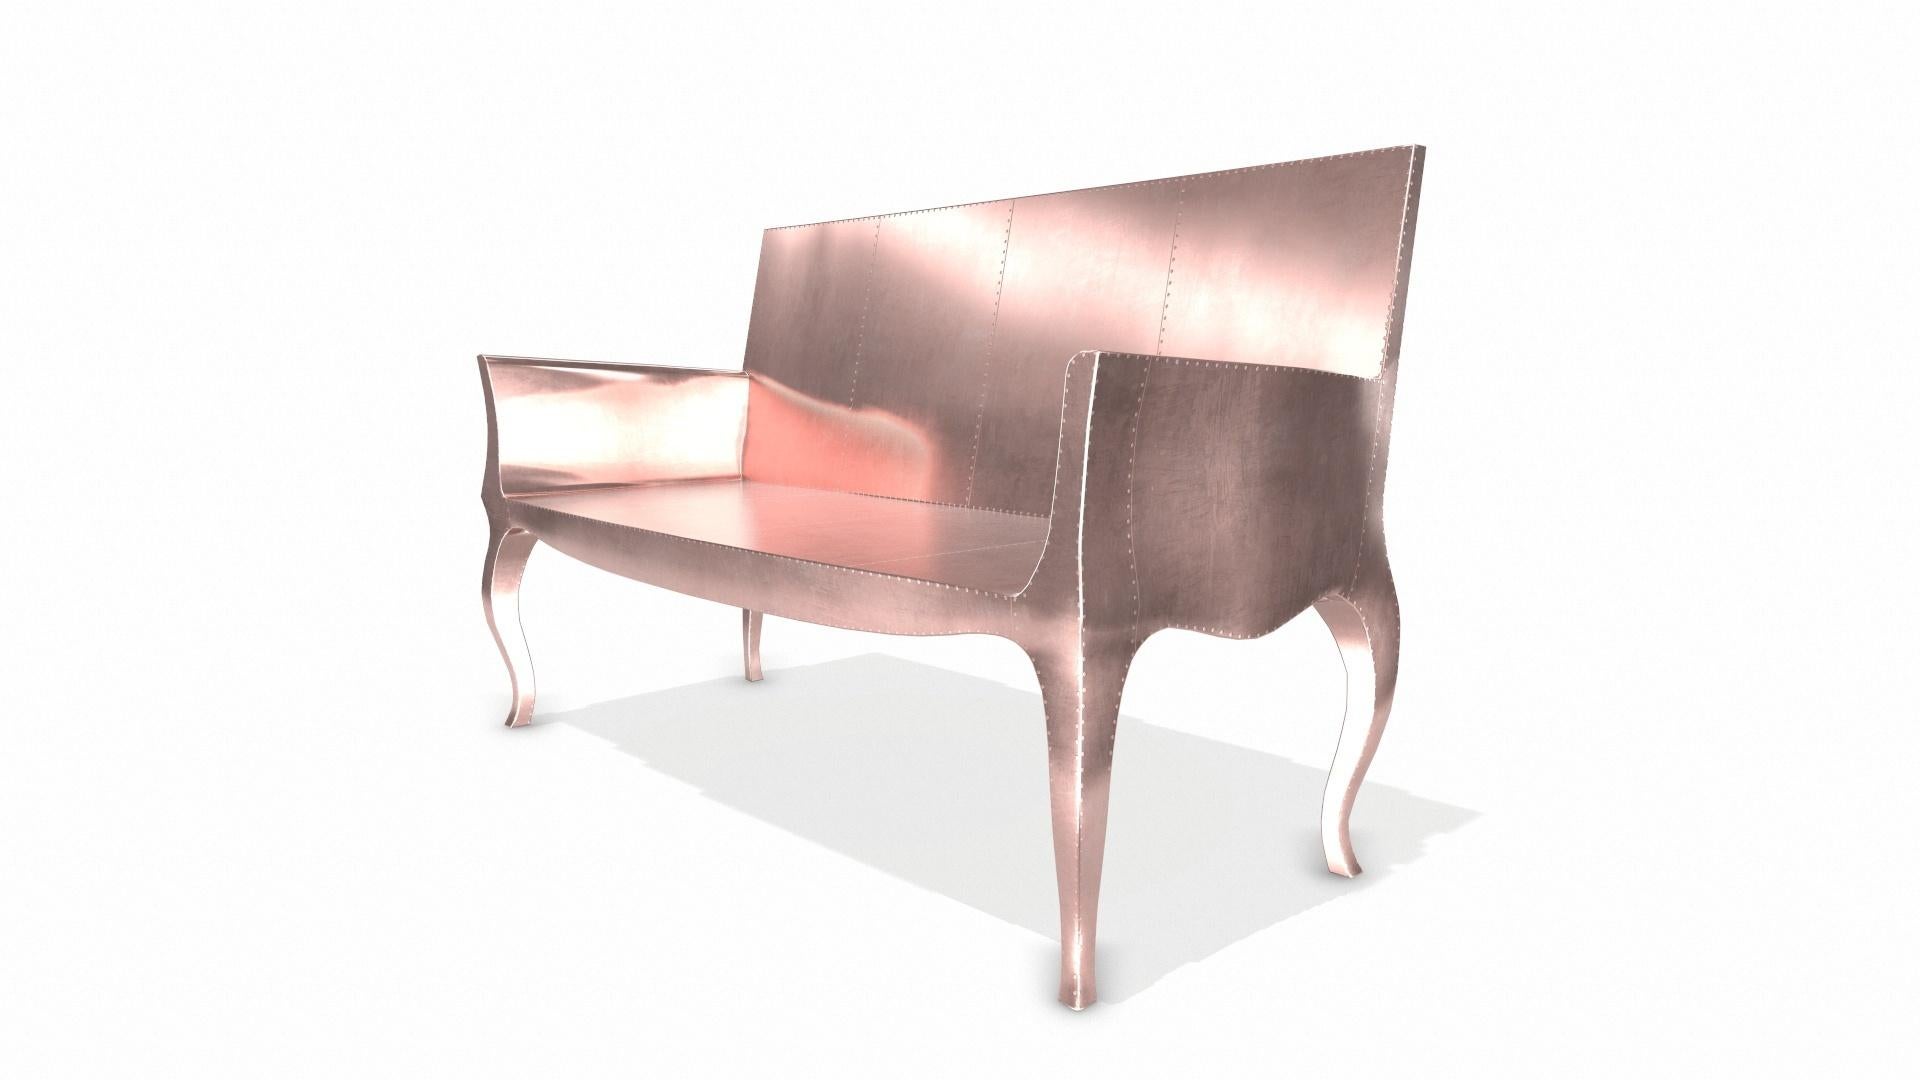 Hand-Crafted Louise Settee Art Deco Lounge Chairs in Smooth Copper by Paul Mathieu  For Sale